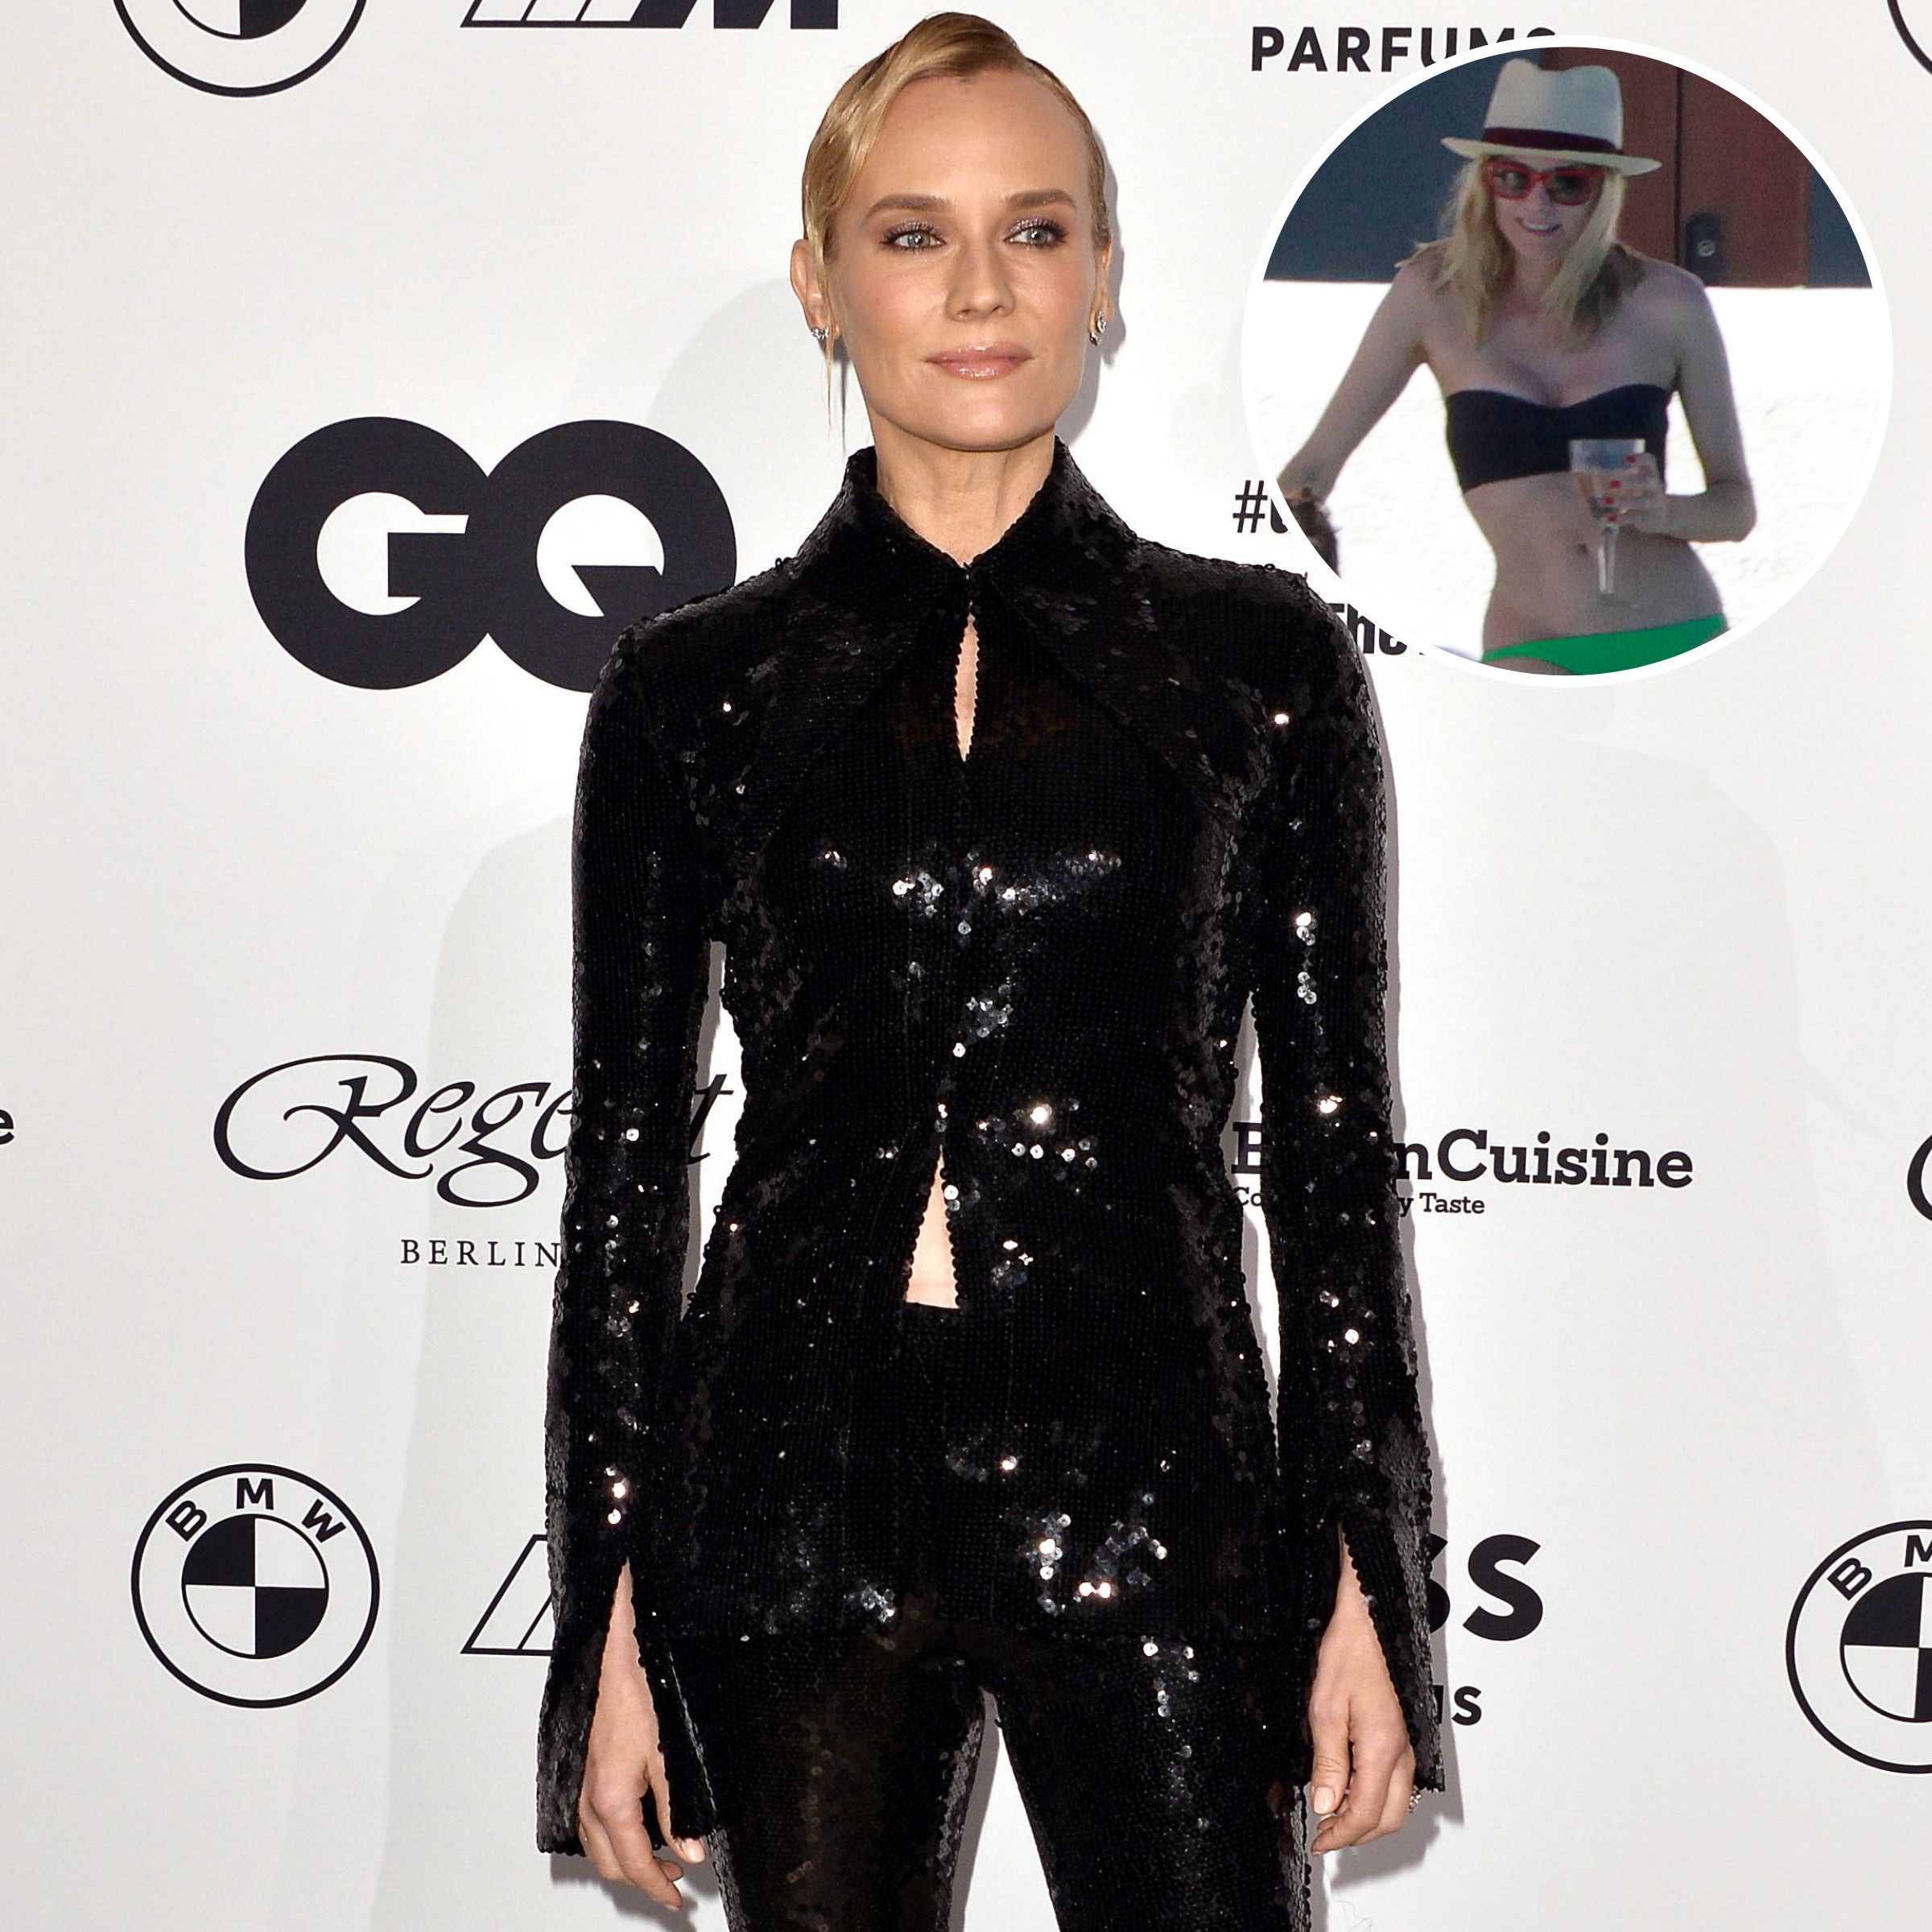 Diane Kruger Shares Rare Photo of Daughter for Thanksgiving